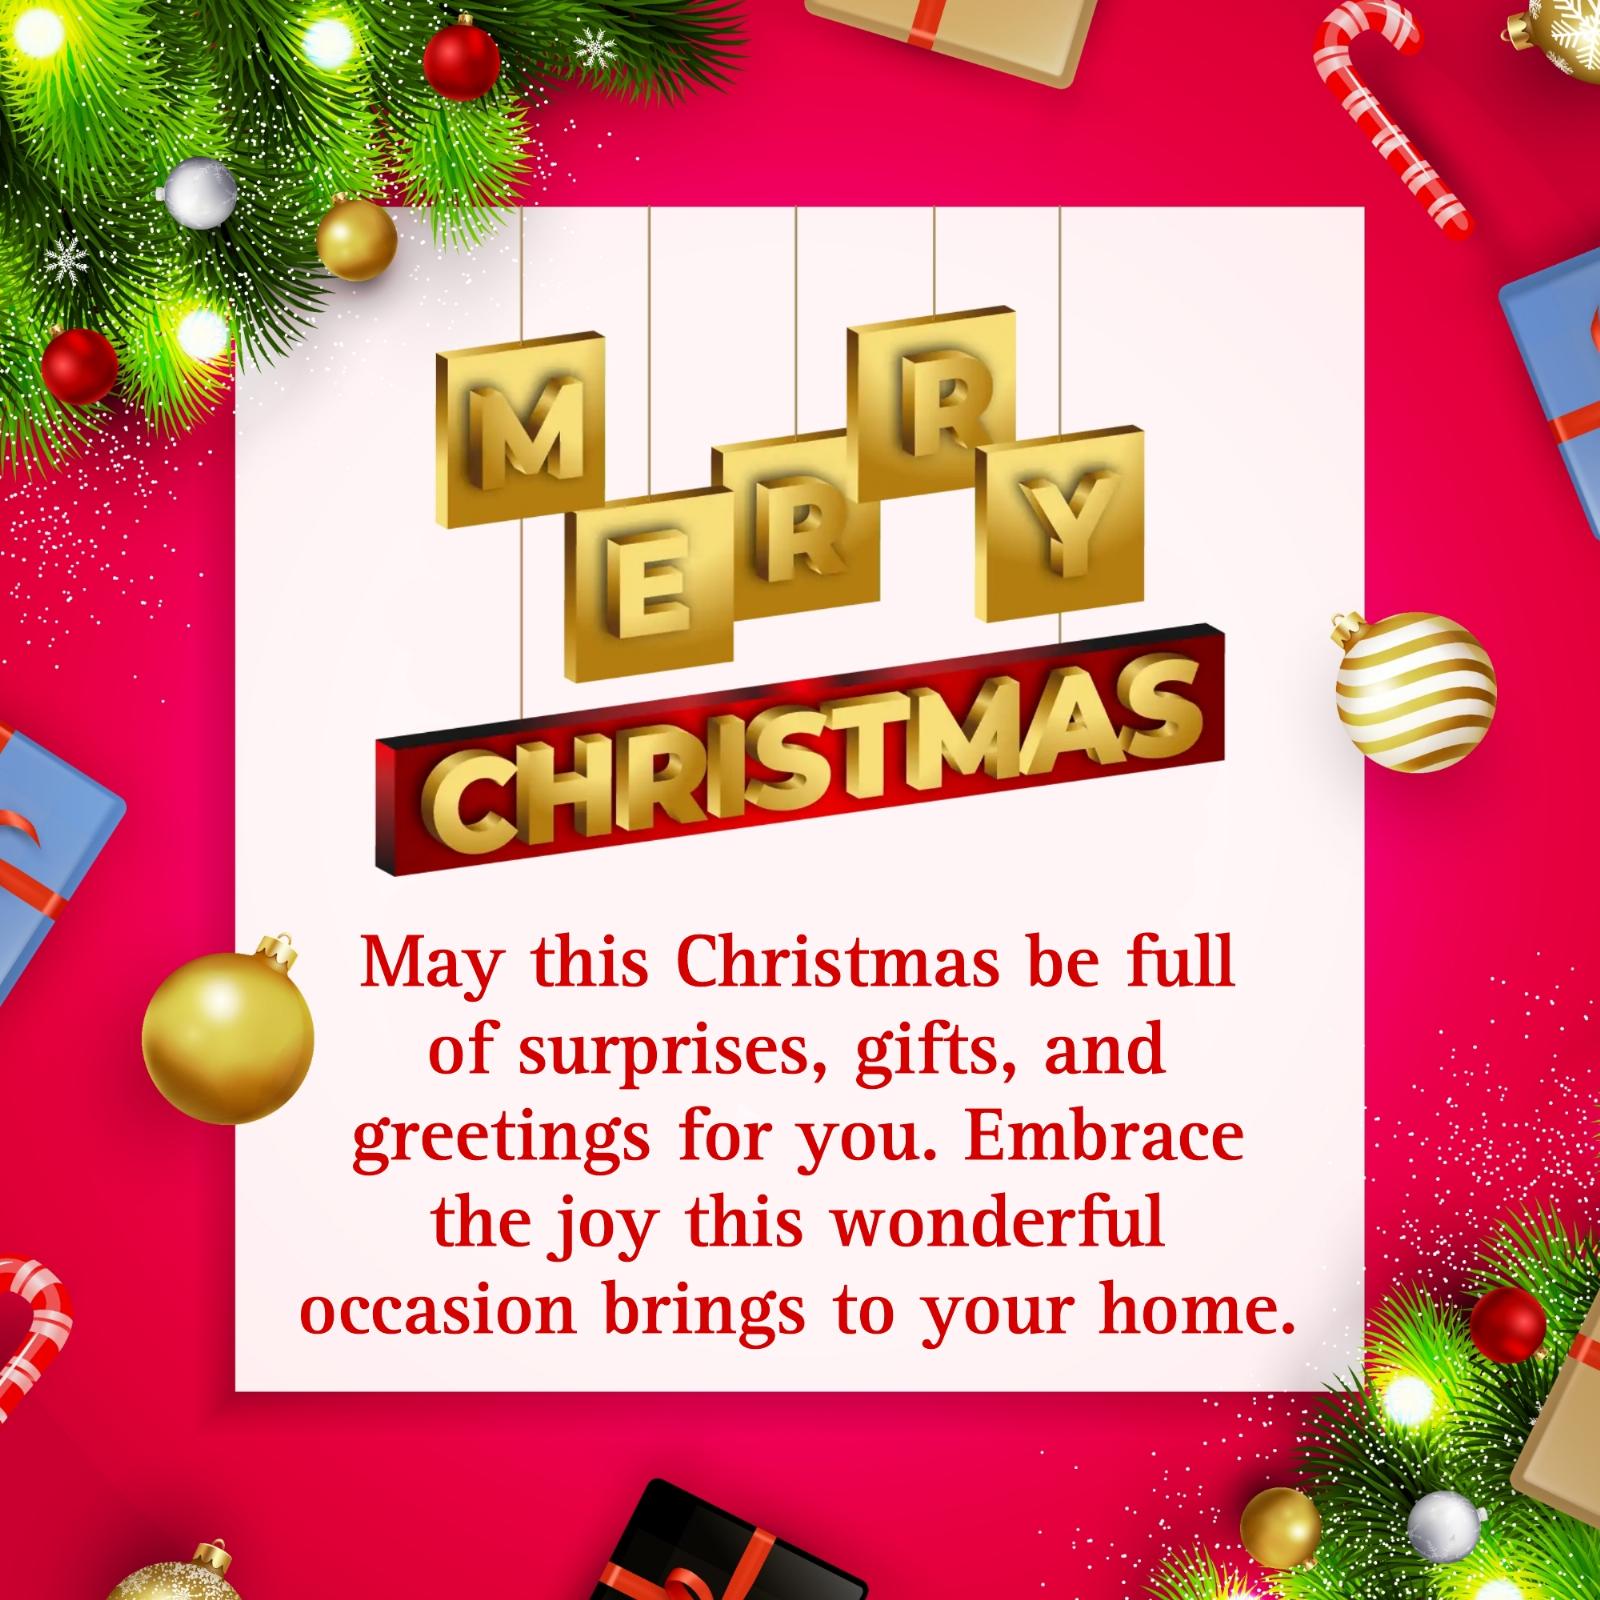 May this Christmas be full of surprises gifts and greetings